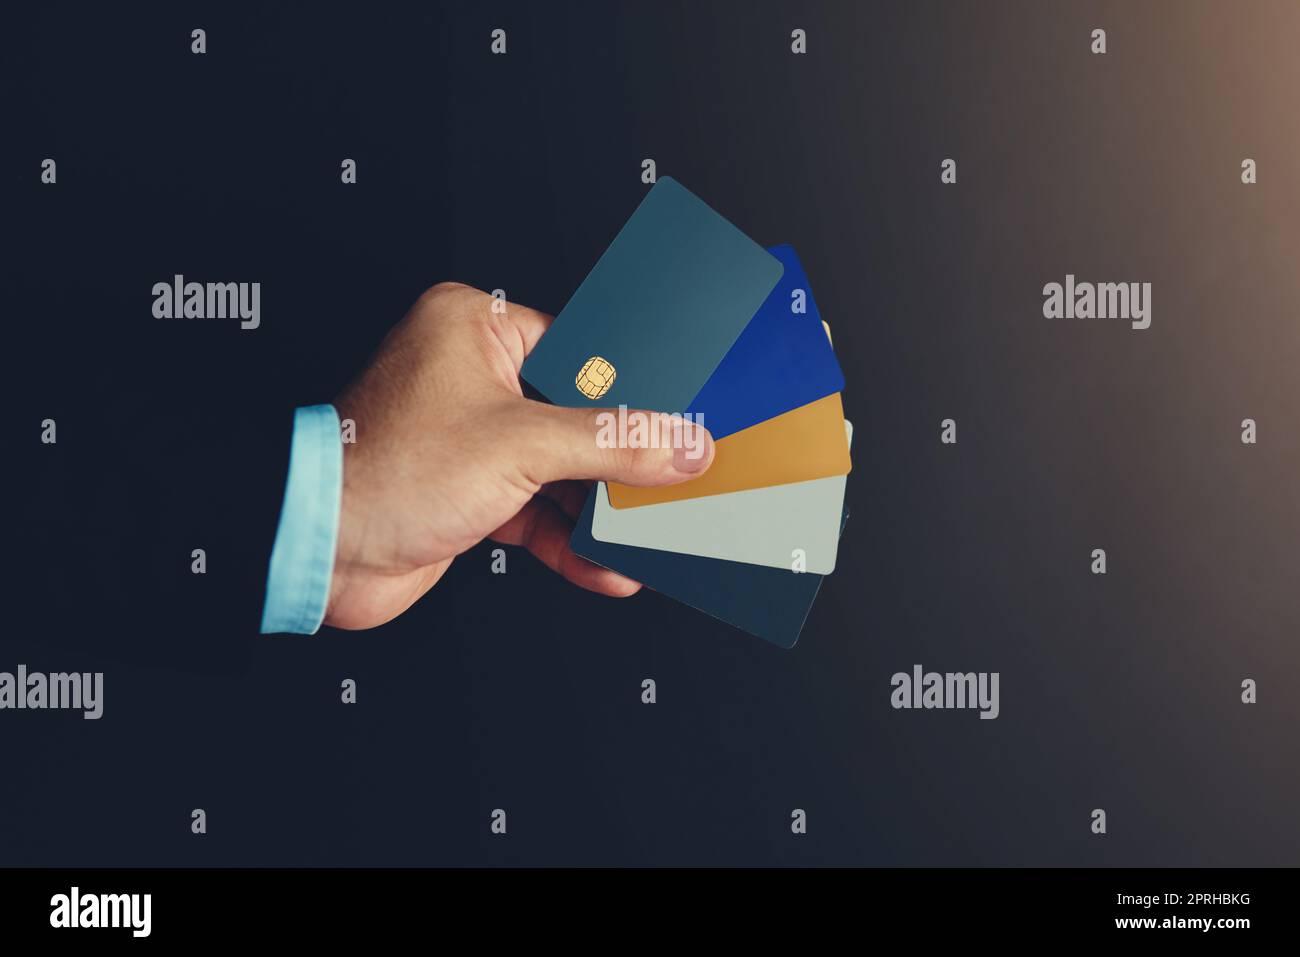 Settle the charge by card. Studio shot of an unidentifiable businessman holding a selection of credit cards against a black background. Stock Photo